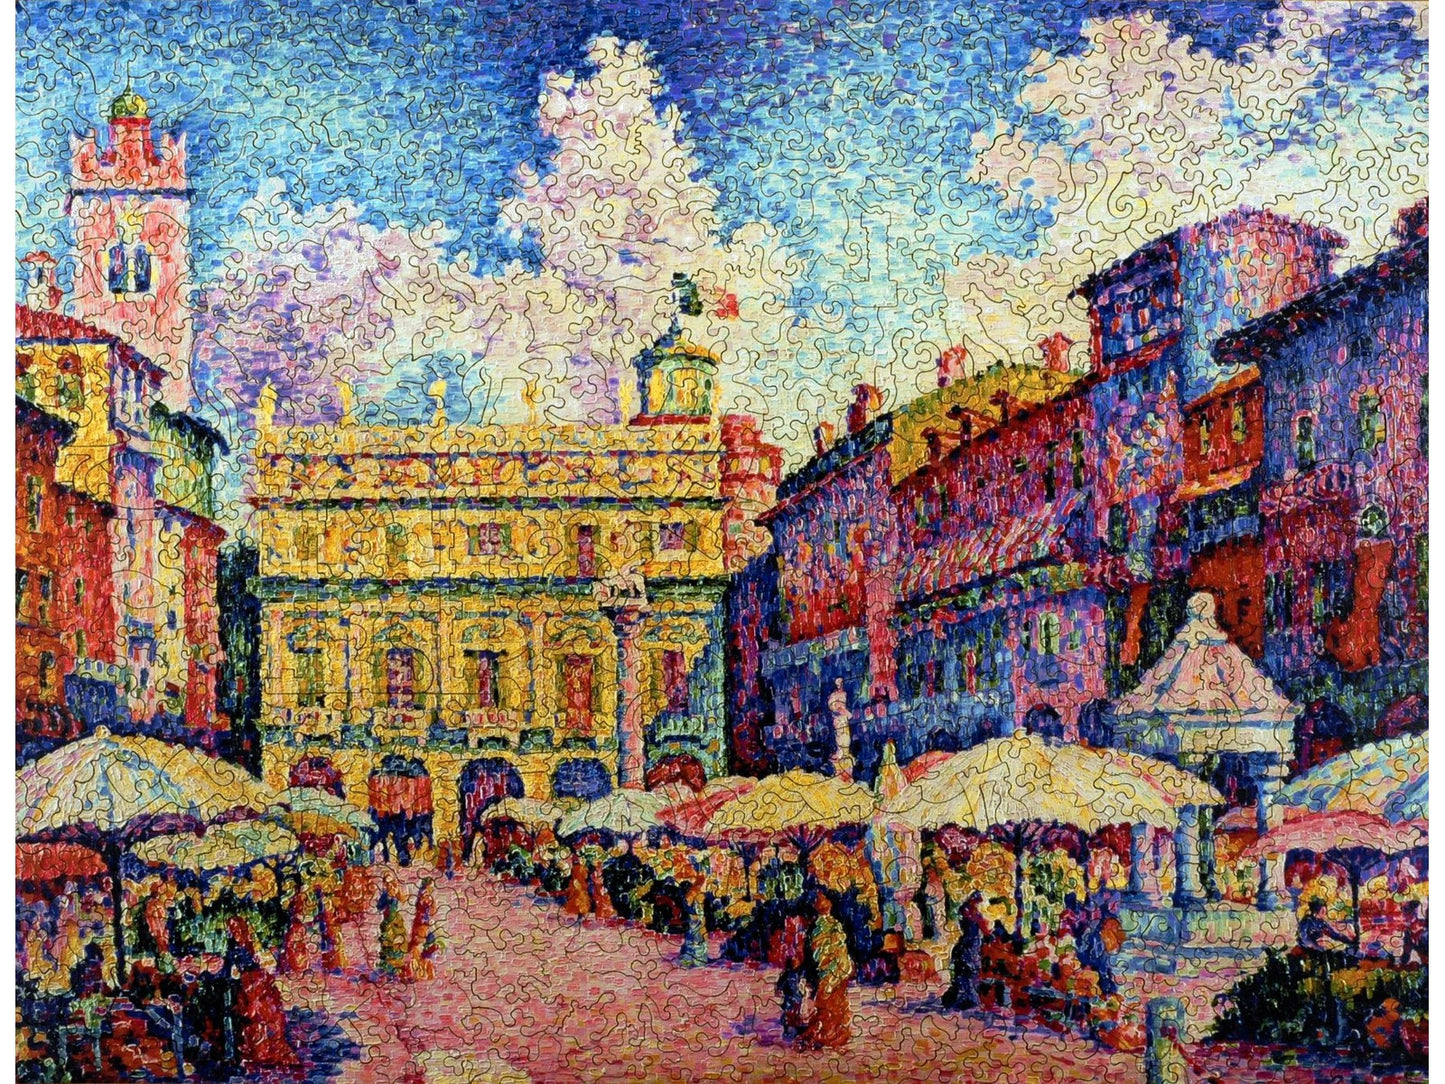 The front of the puzzle, The Herb Market, Verona, depicting a town market square scene, surrounded by colorful buildings.